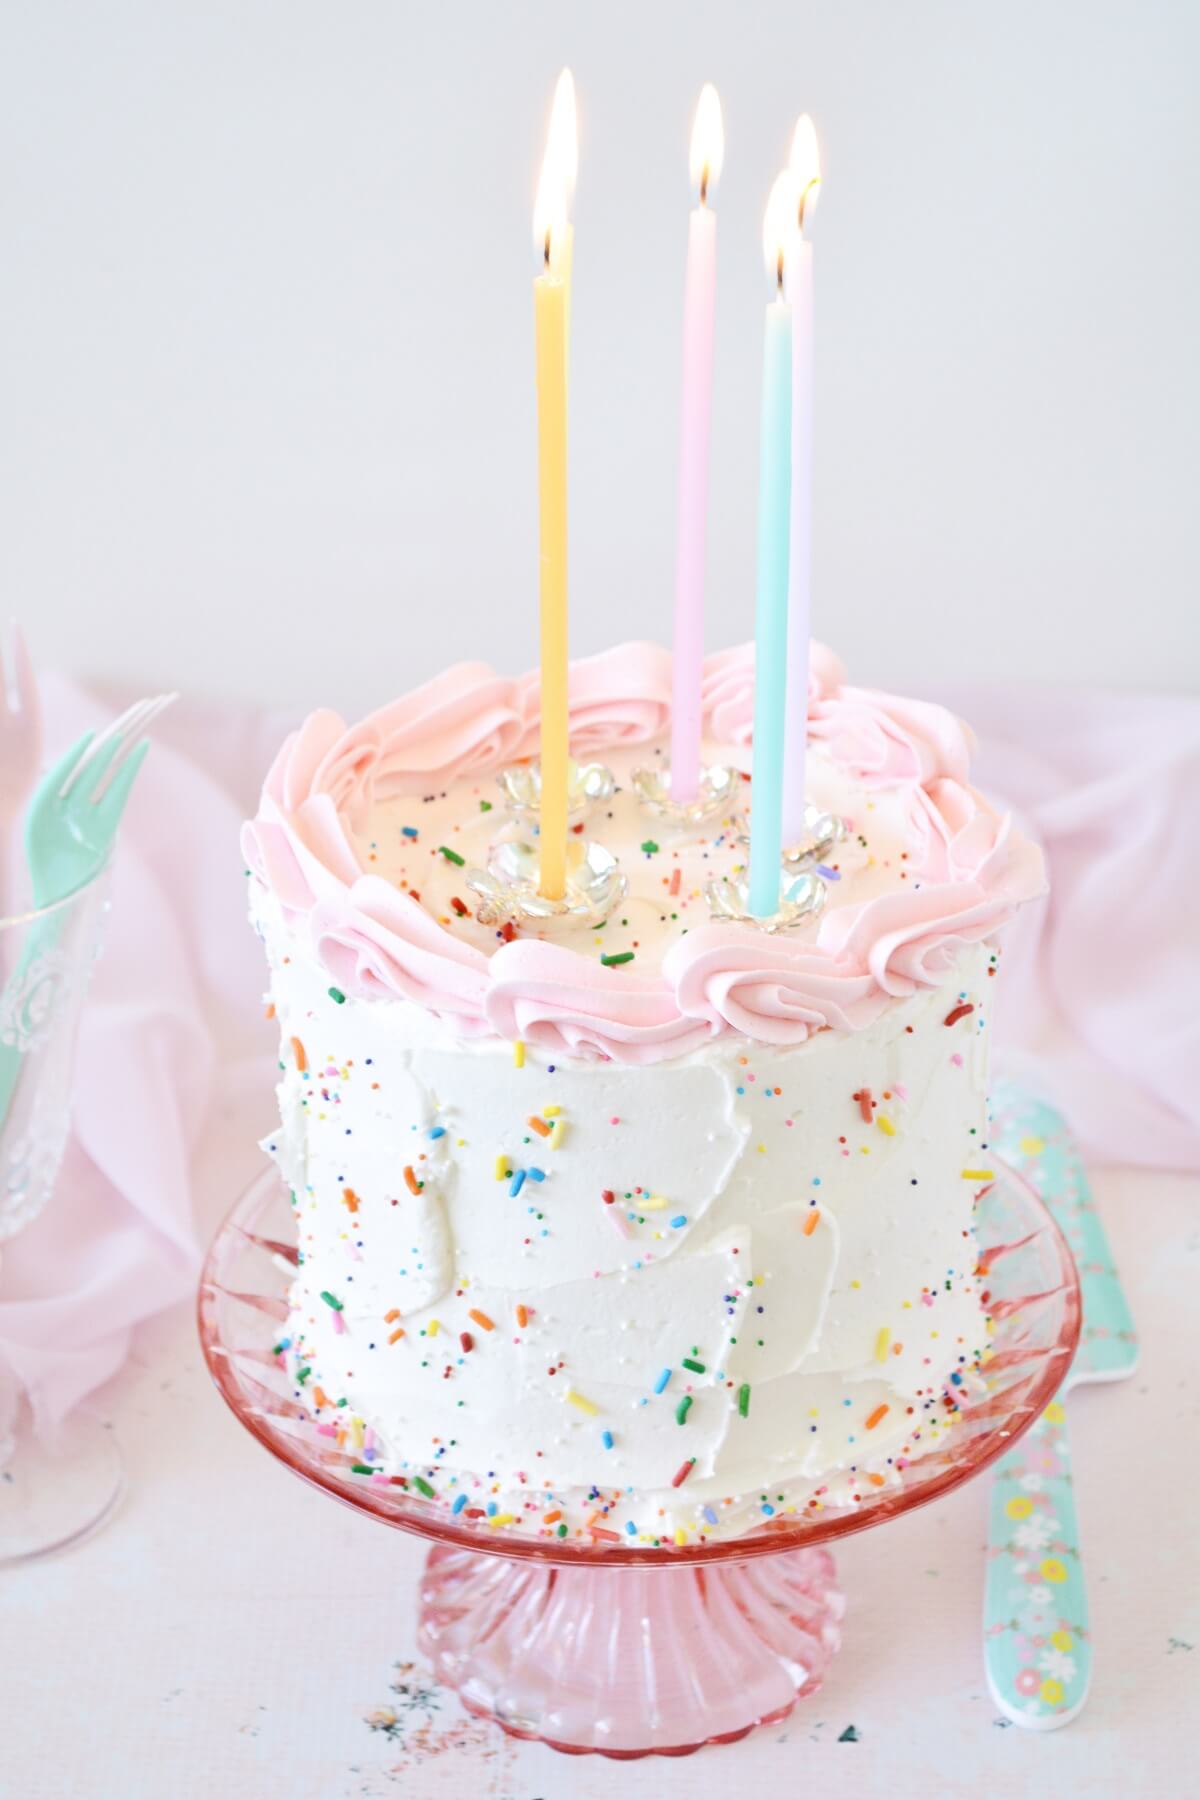 A birthday cake on a pink cake stand.